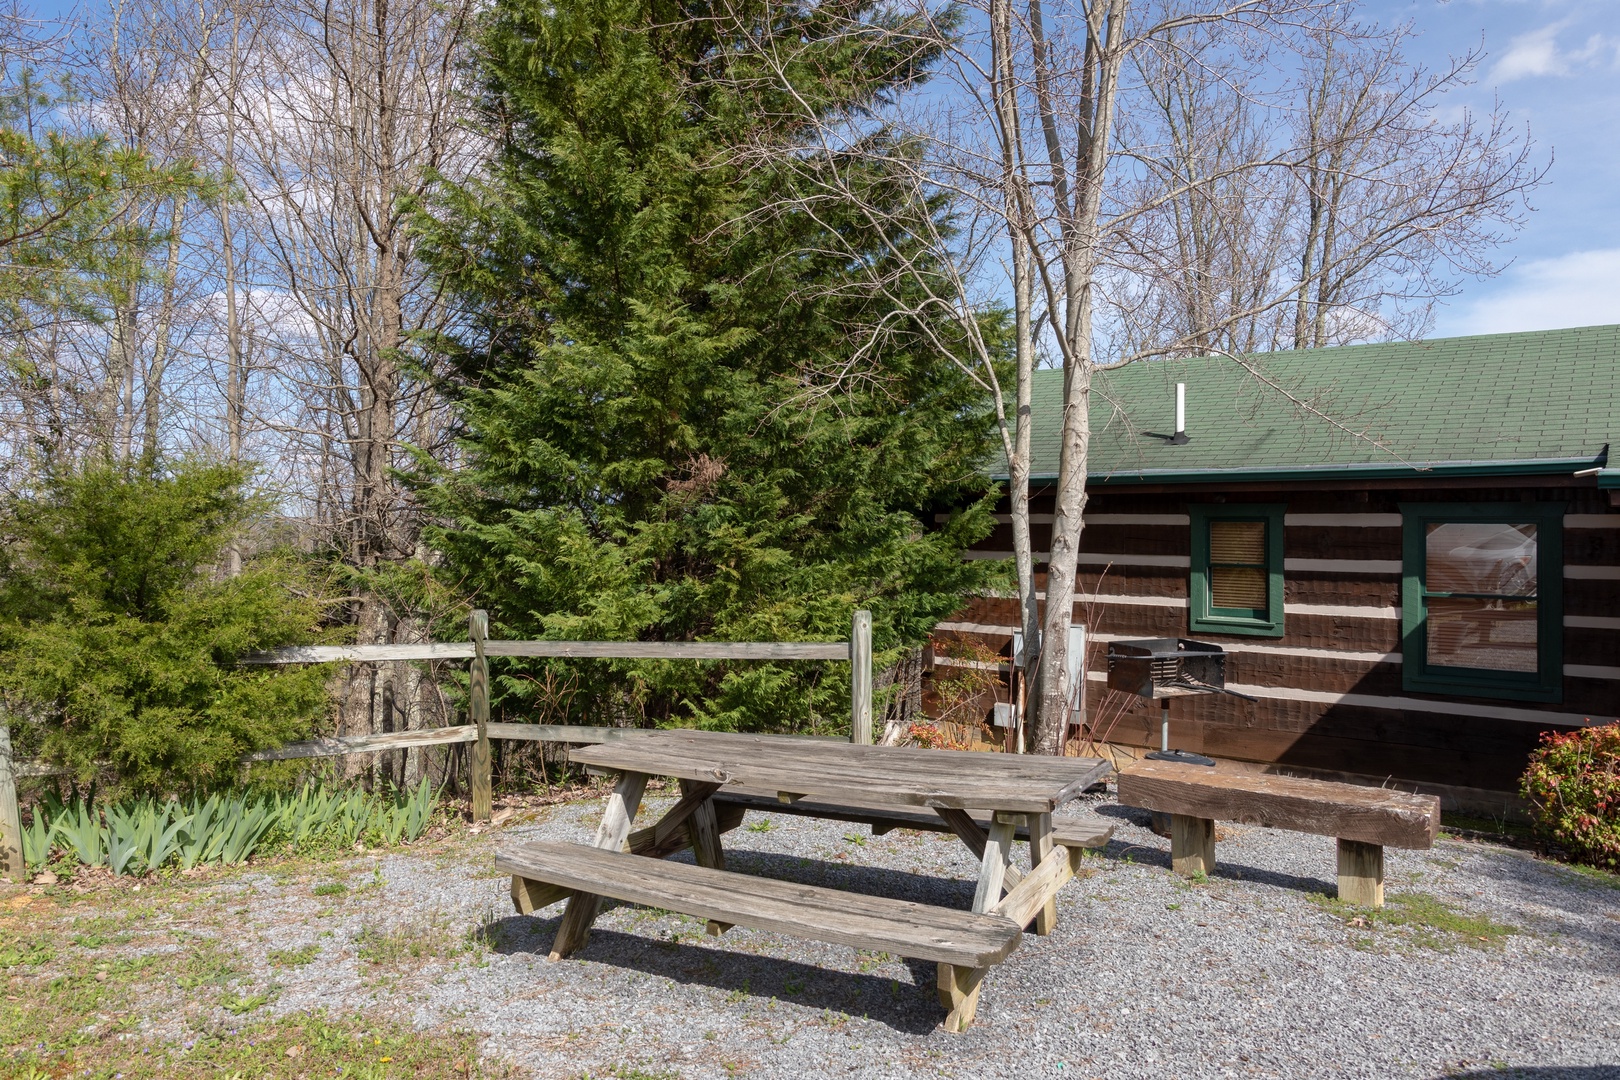 Picnic table in the yard at Blue Mountain Views, a 1 bedroom cabin rental located in Pigeon Forge